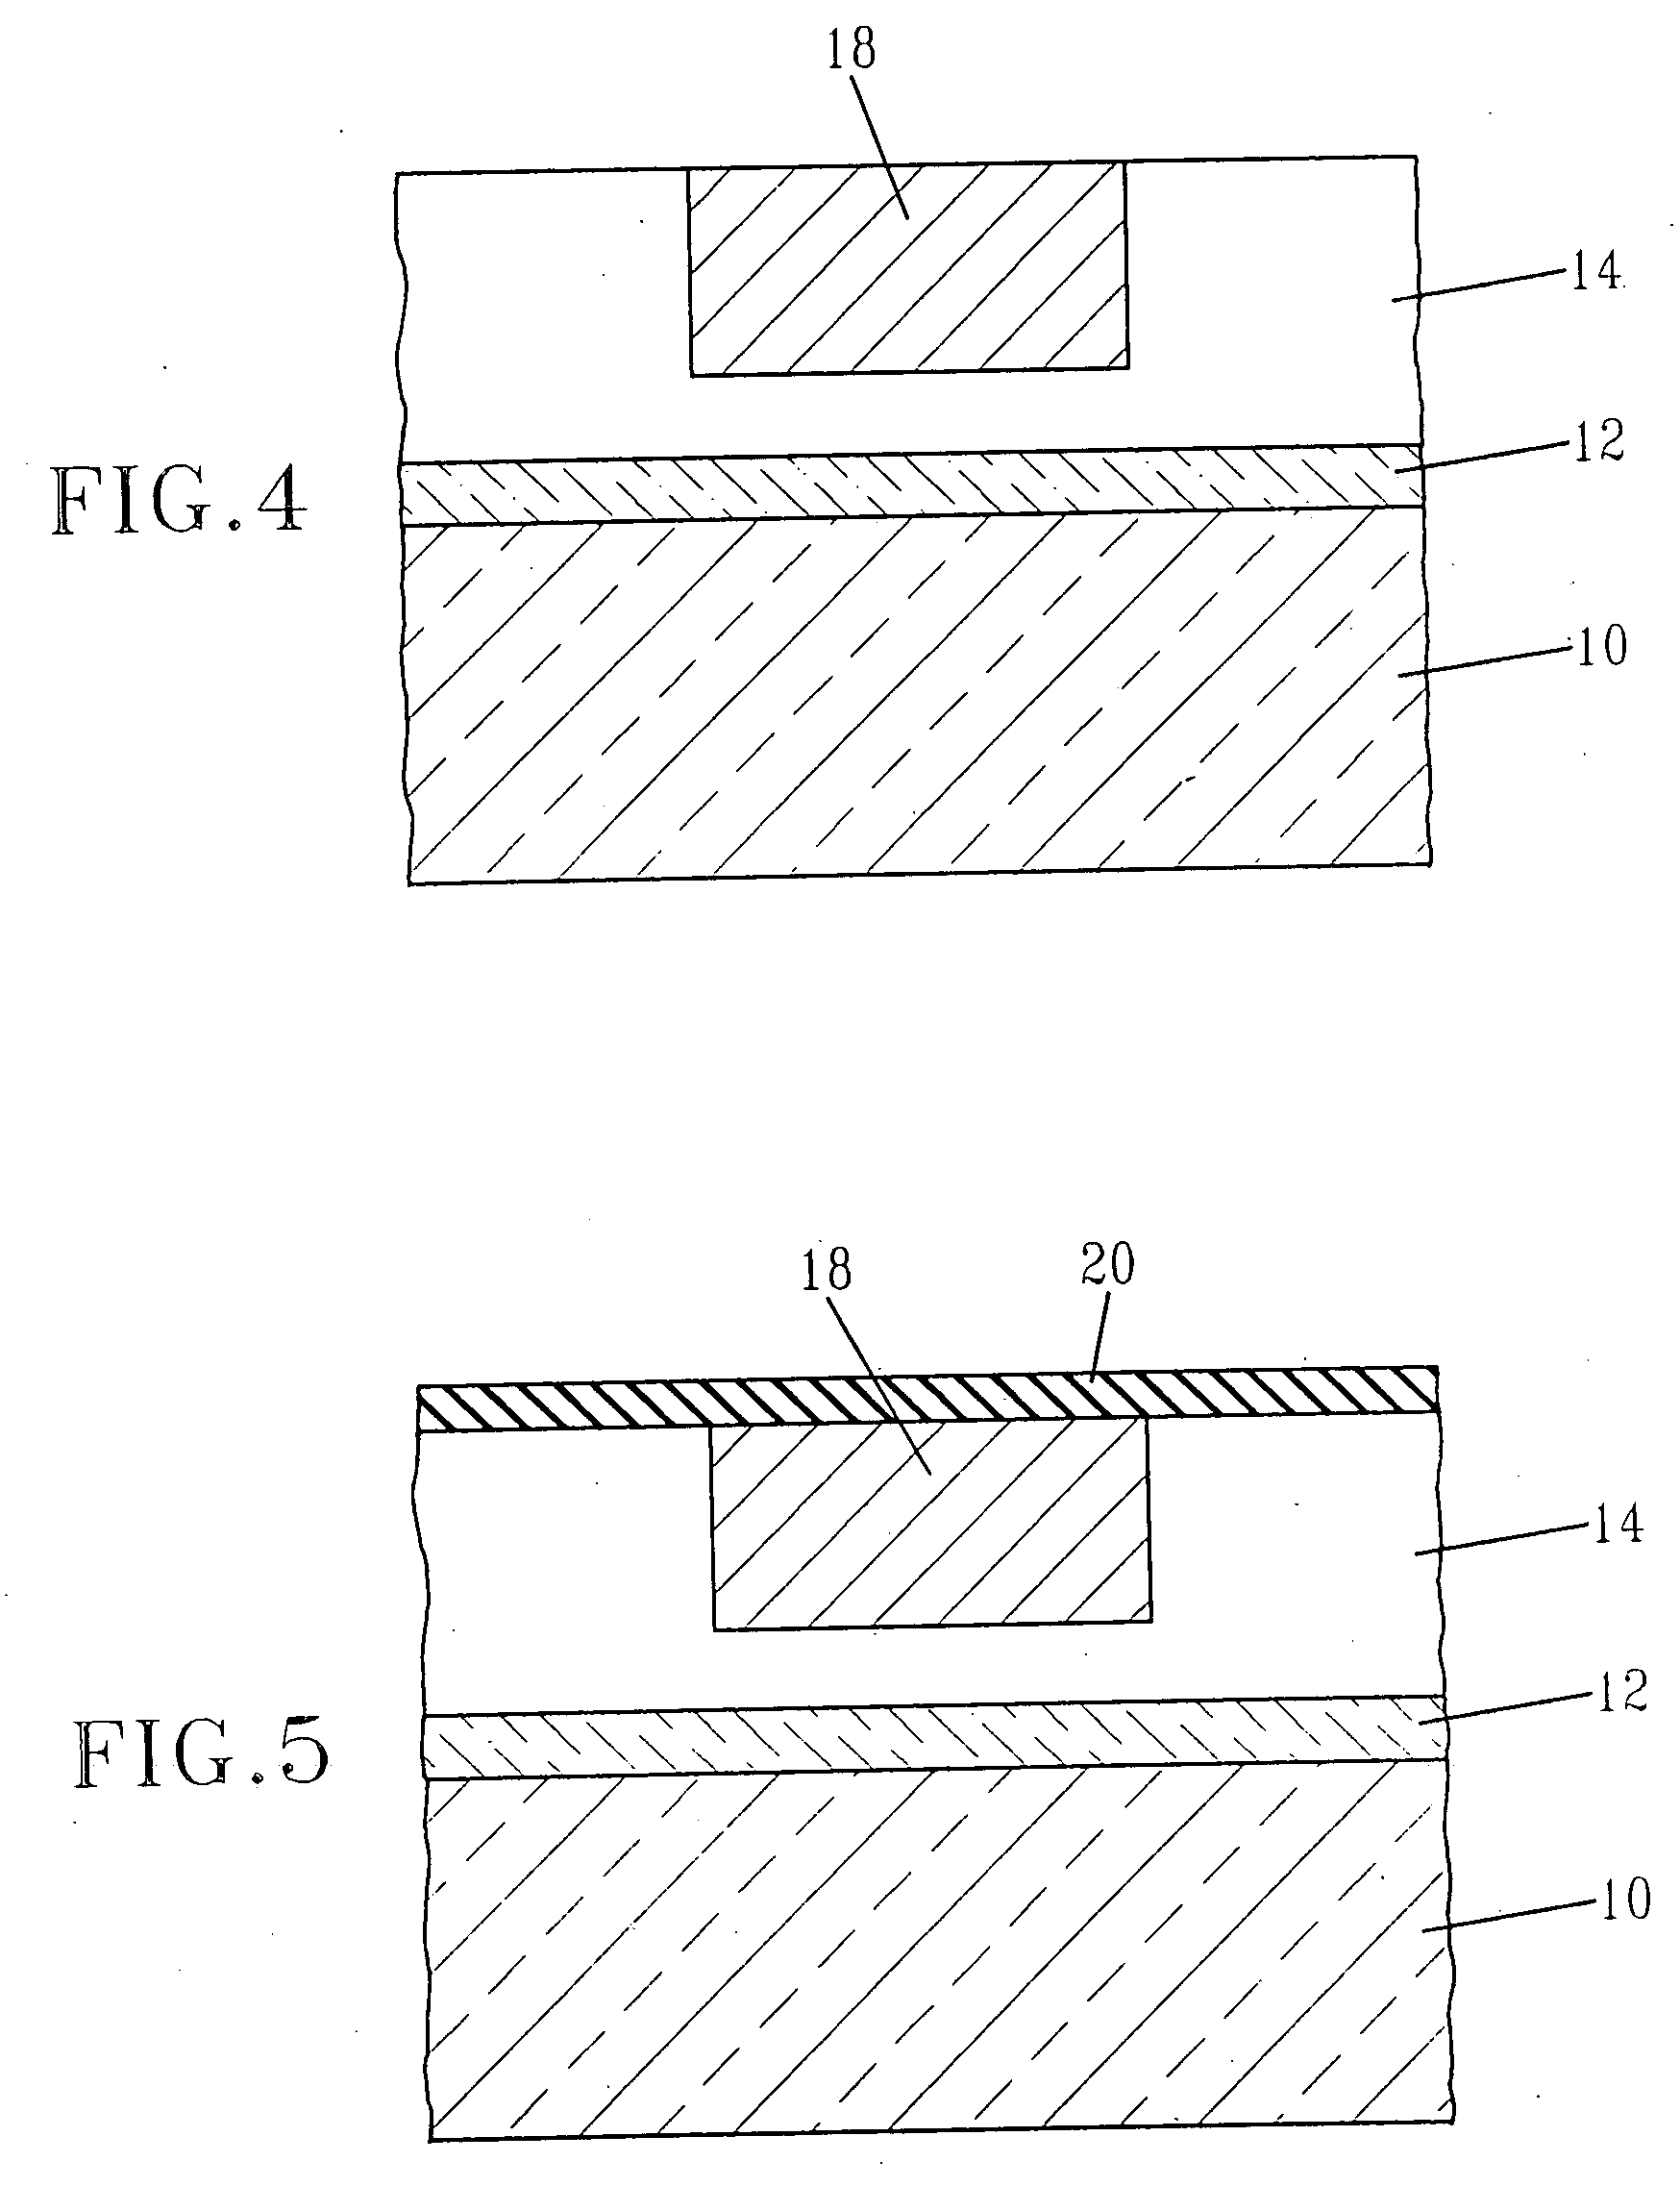 Low-k dielectric material system for IC application